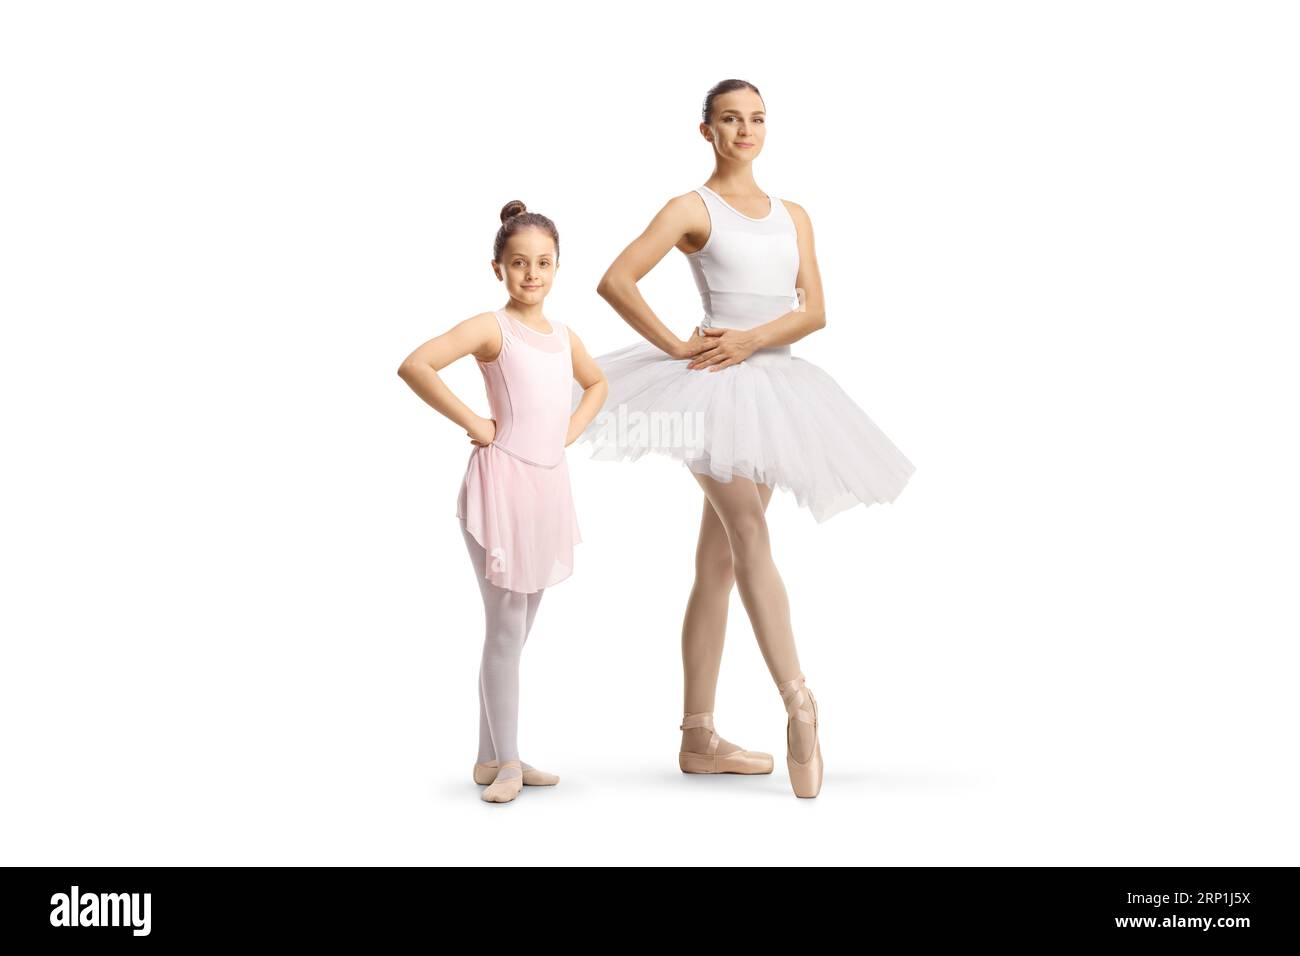 Full length portrait of a little girl ballerina standing next to a professional ballet dancer isolated on white background Stock Photo